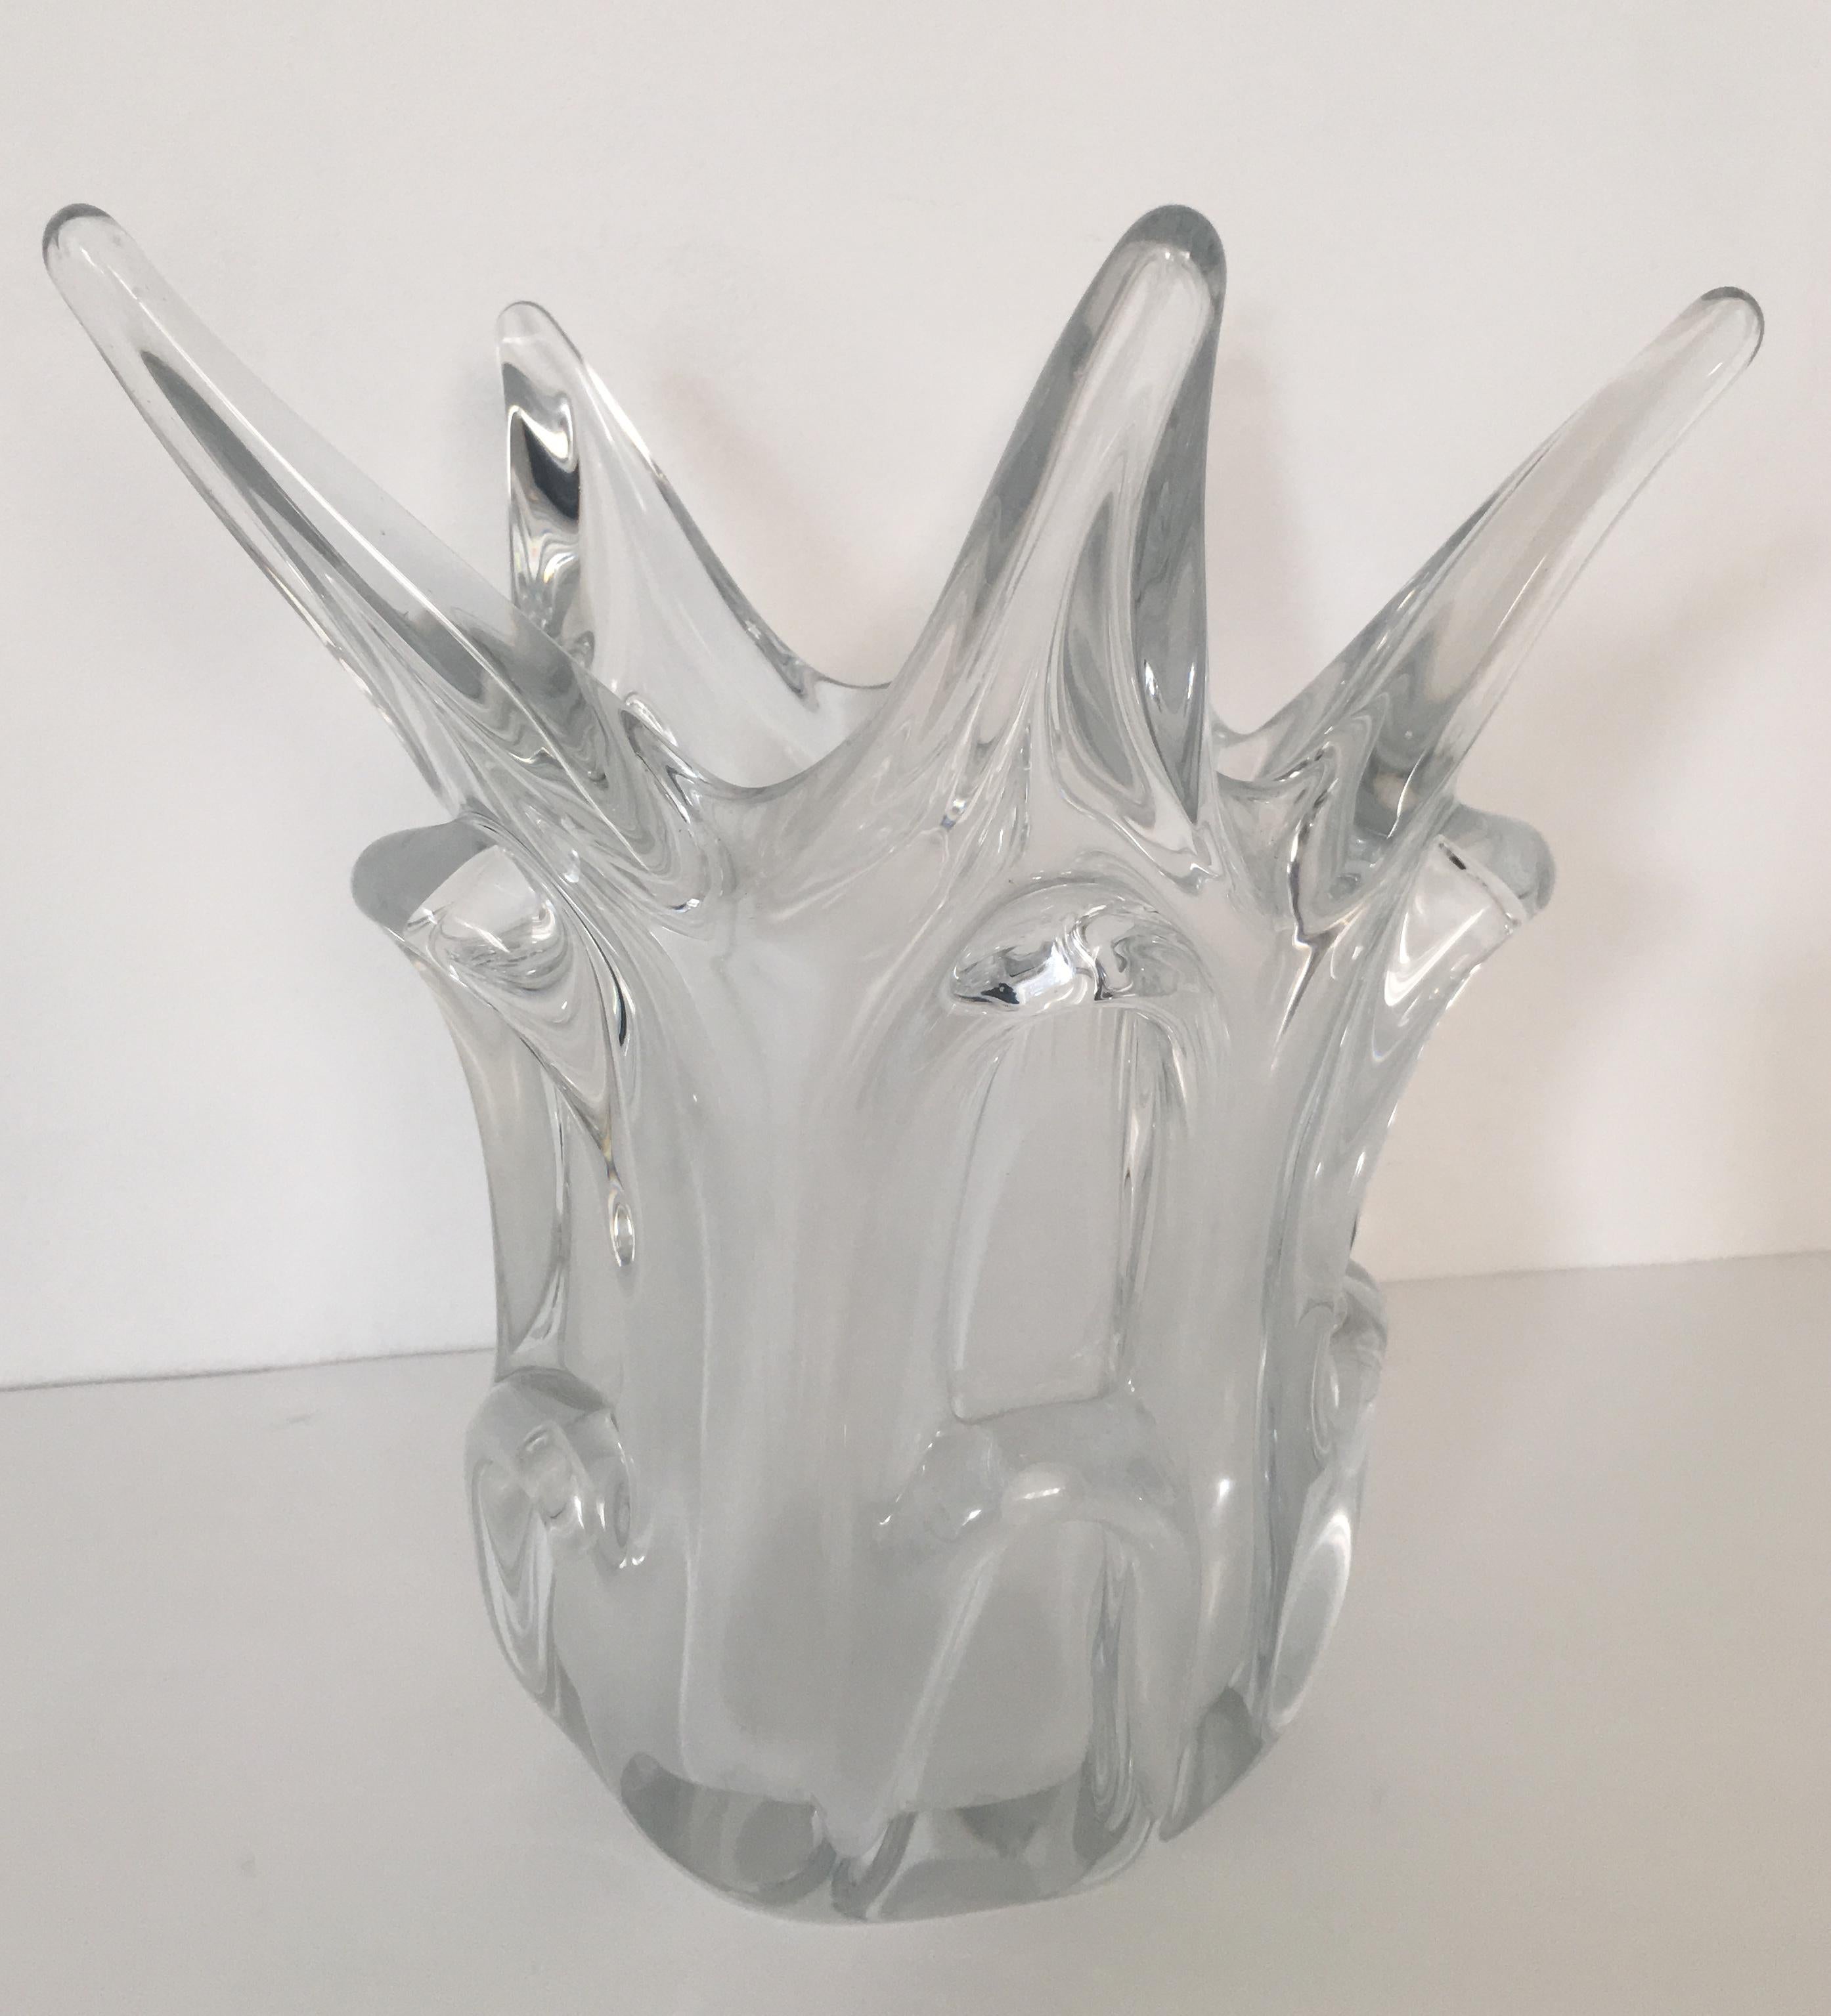 Midcentury French handcrafted fluted vase.
A wonderful design piece made of clear lead crystal typical of French art glass from the 1950s-1960s. 

Perfect condition. No chips nor cracks. Makes a great centerpiece and gift. 
Bears the makers mark